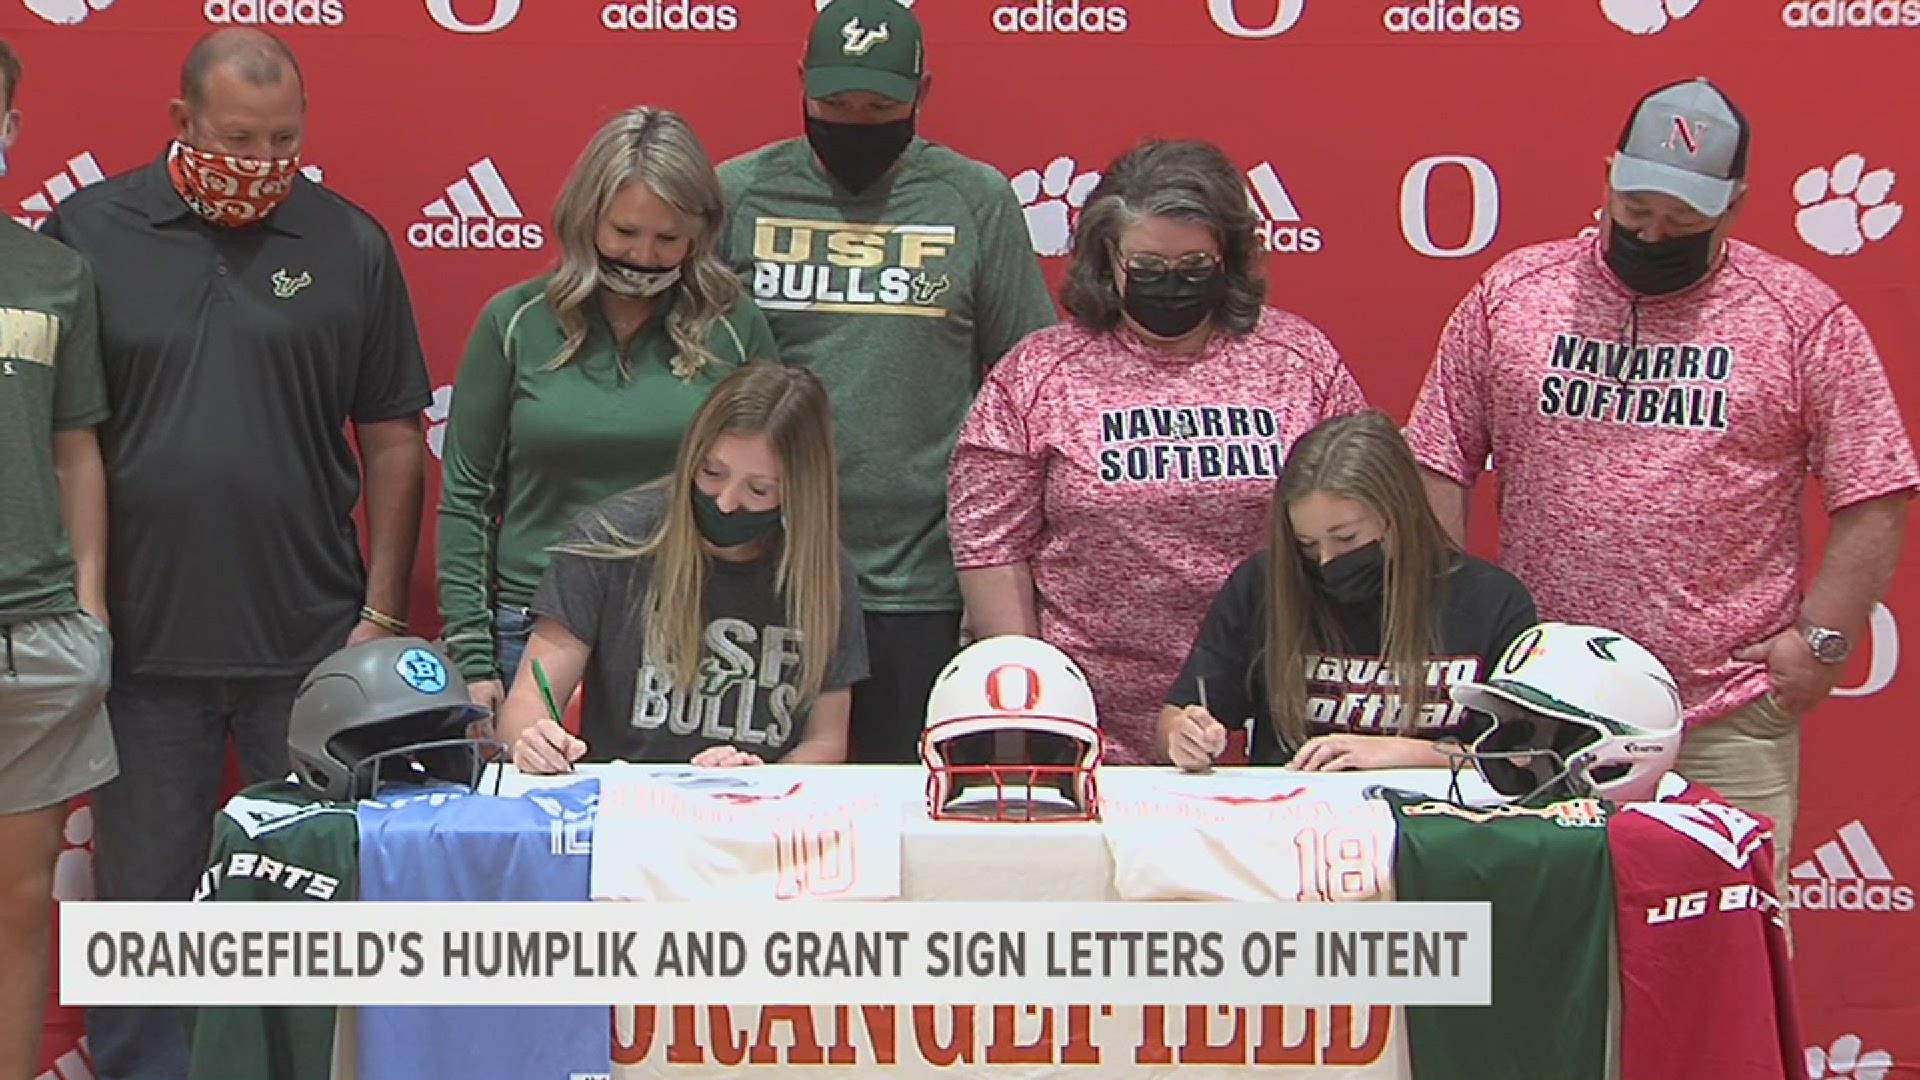 Humplik will be taking her talents to the University of South Florida while Grant is headed to Navarro.